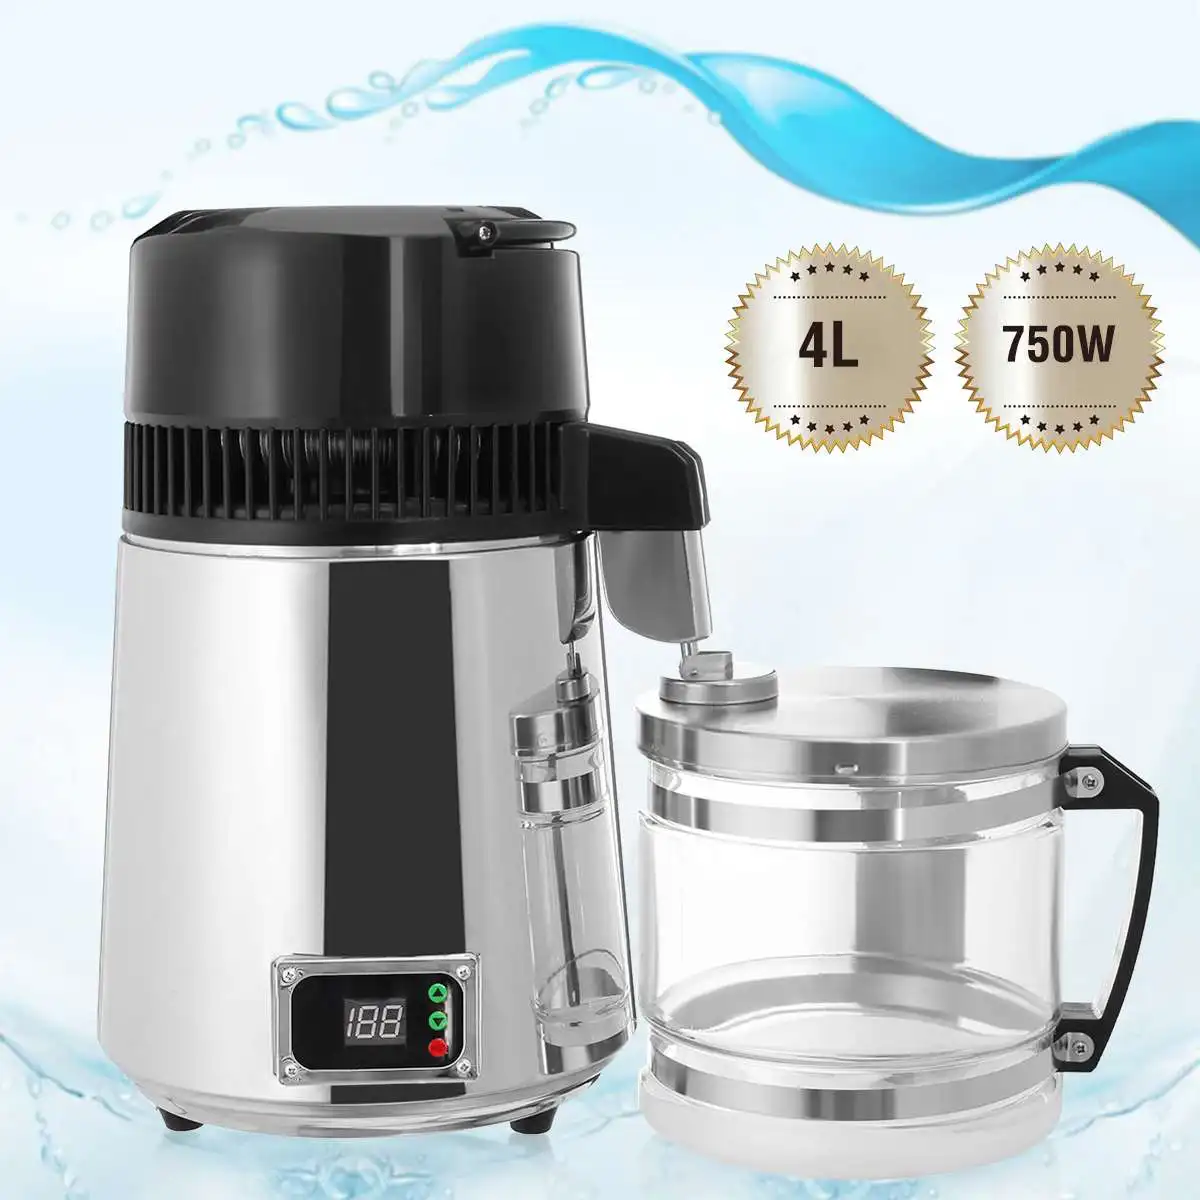 

4L Pure Water Filters Distiller Electric Stainless Steel Household Water Purifier Container Filter Distilled Water Machine